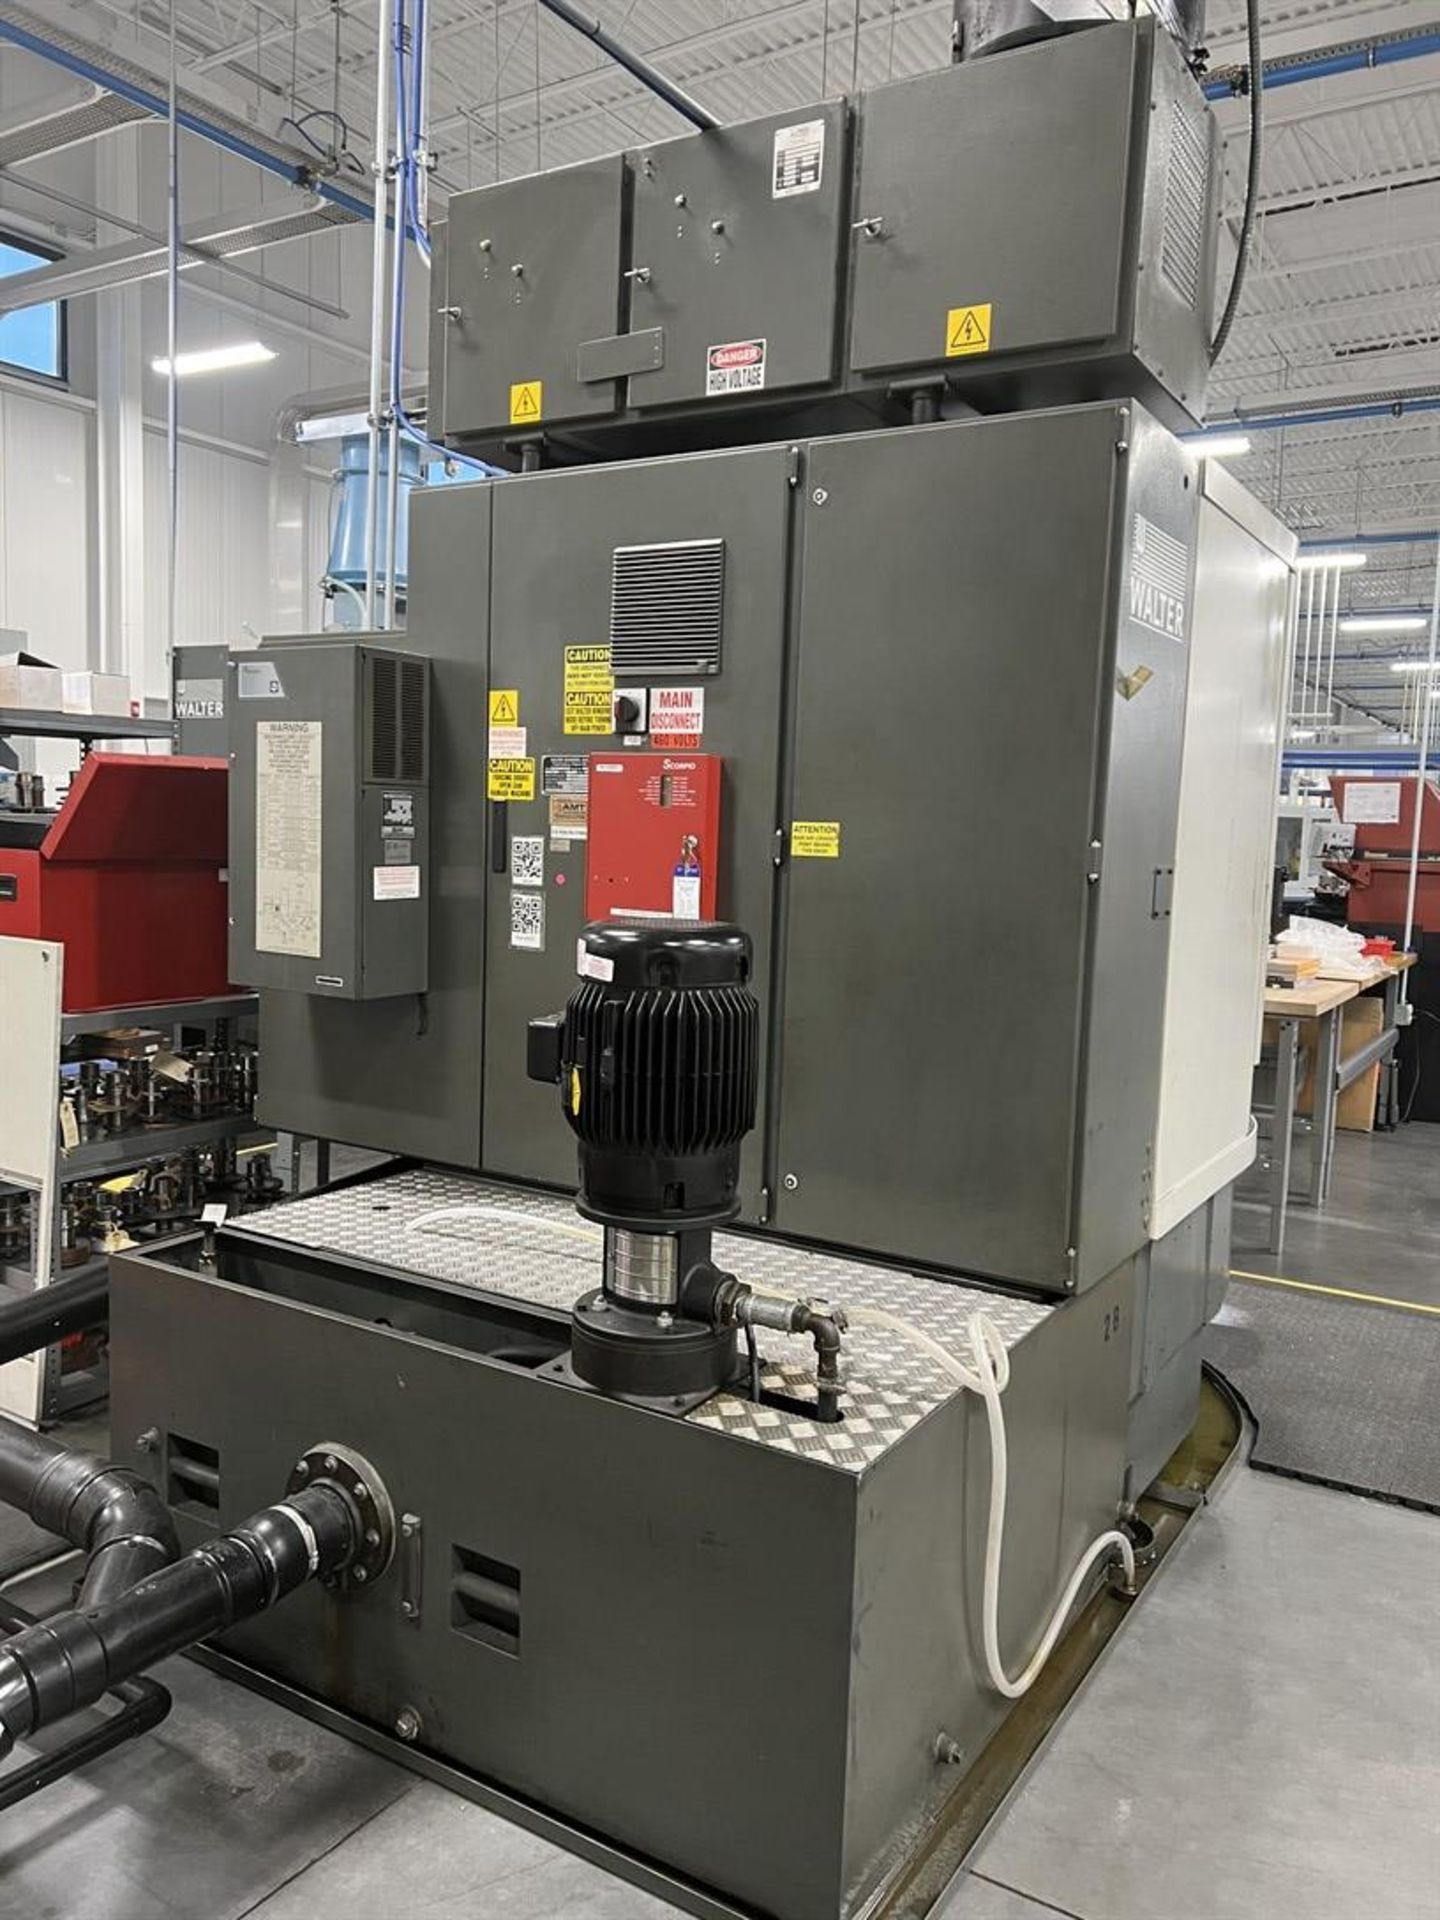 2000 WALTER Helitronic Production CNC 7-Axis Tool & Cutter Grinder, s/n 653050, HMC 500 Control, - Image 8 of 9